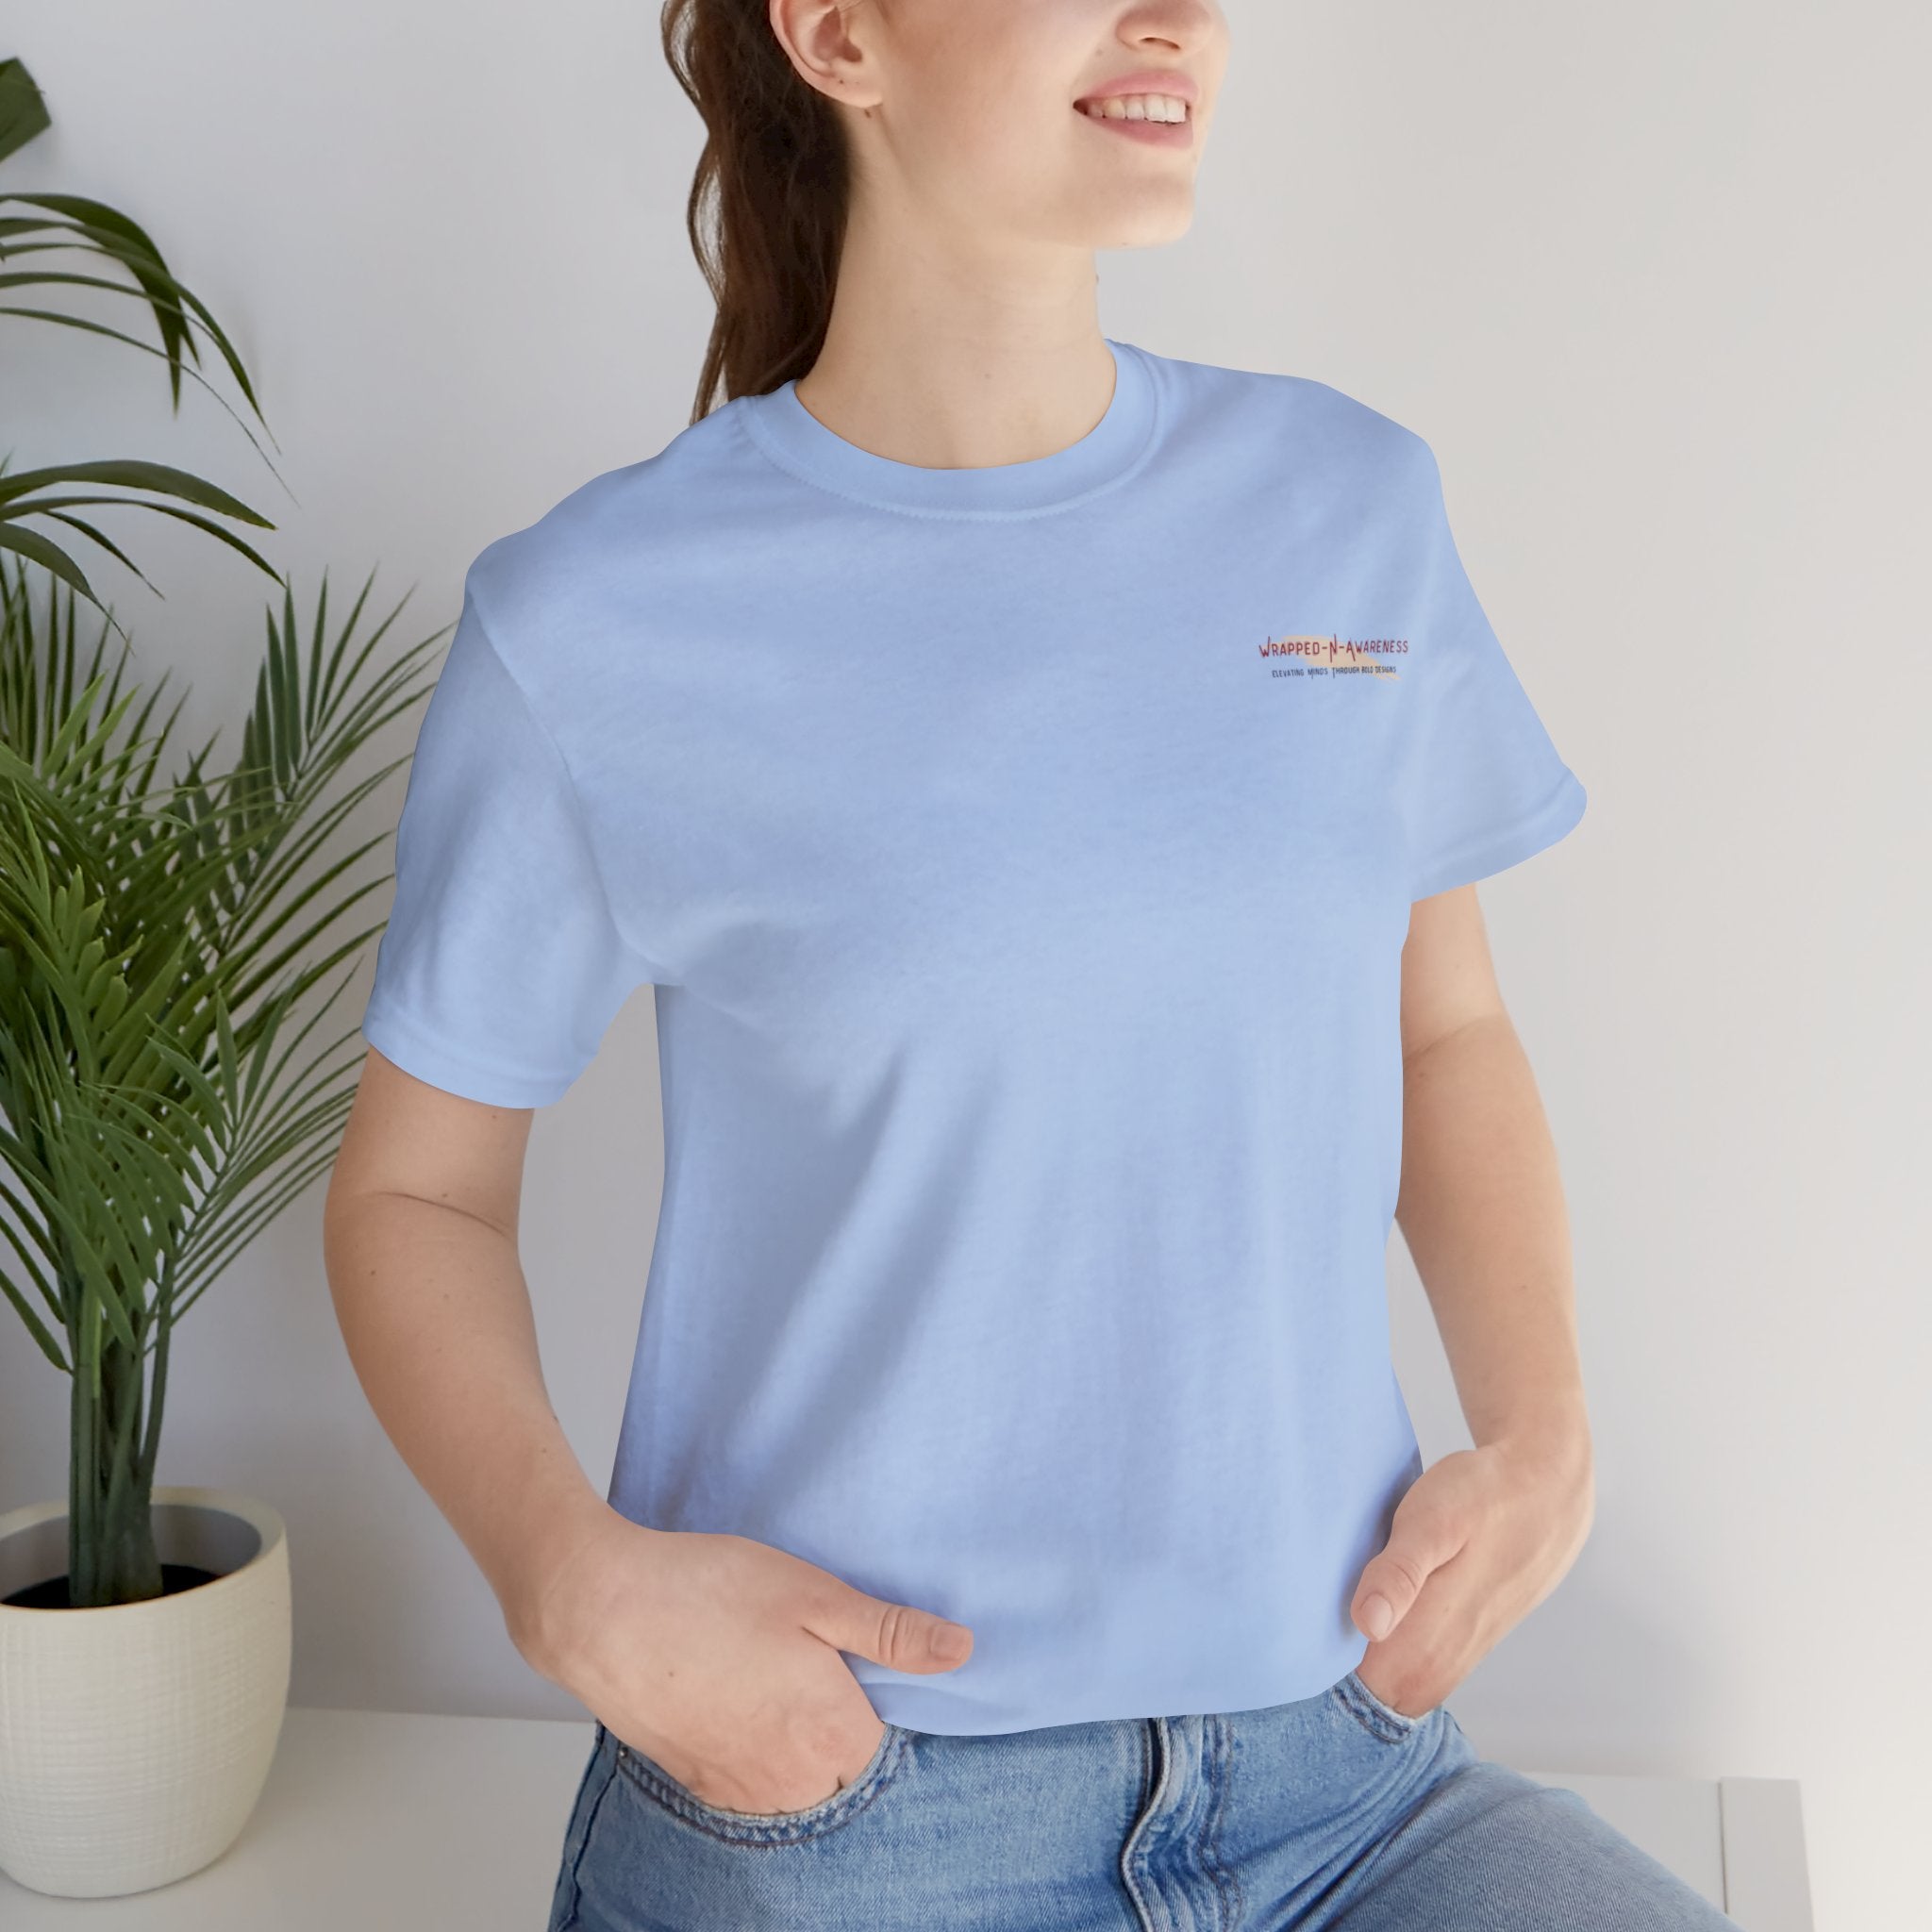 Inspire Growth Jersey Tee - Bella+Canvas 3001 Turquoise Airlume Cotton Bella+Canvas 3001 Crew Neckline Jersey Short Sleeve Lightweight Fabric Mental Health Support Retail Fit Tear-away Label Tee Unisex Tee T-Shirt 7795532875729050871_2048 Printify